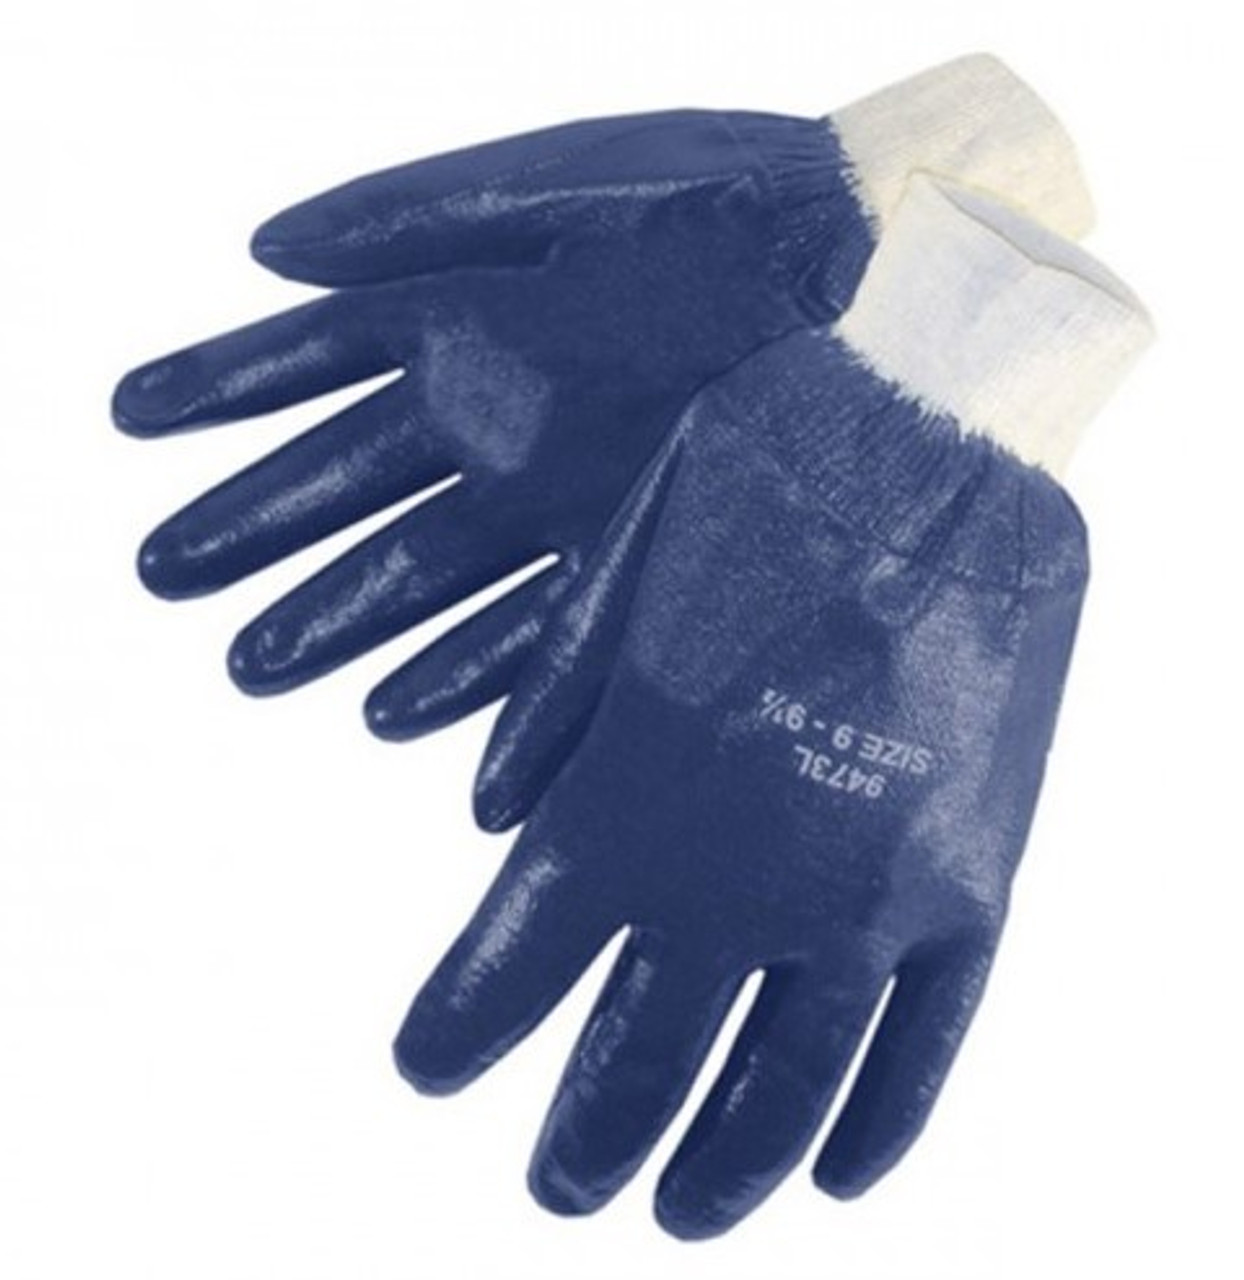 Liberty 9473SP Nitrile fully coated glove with knit wrist (LARGE)